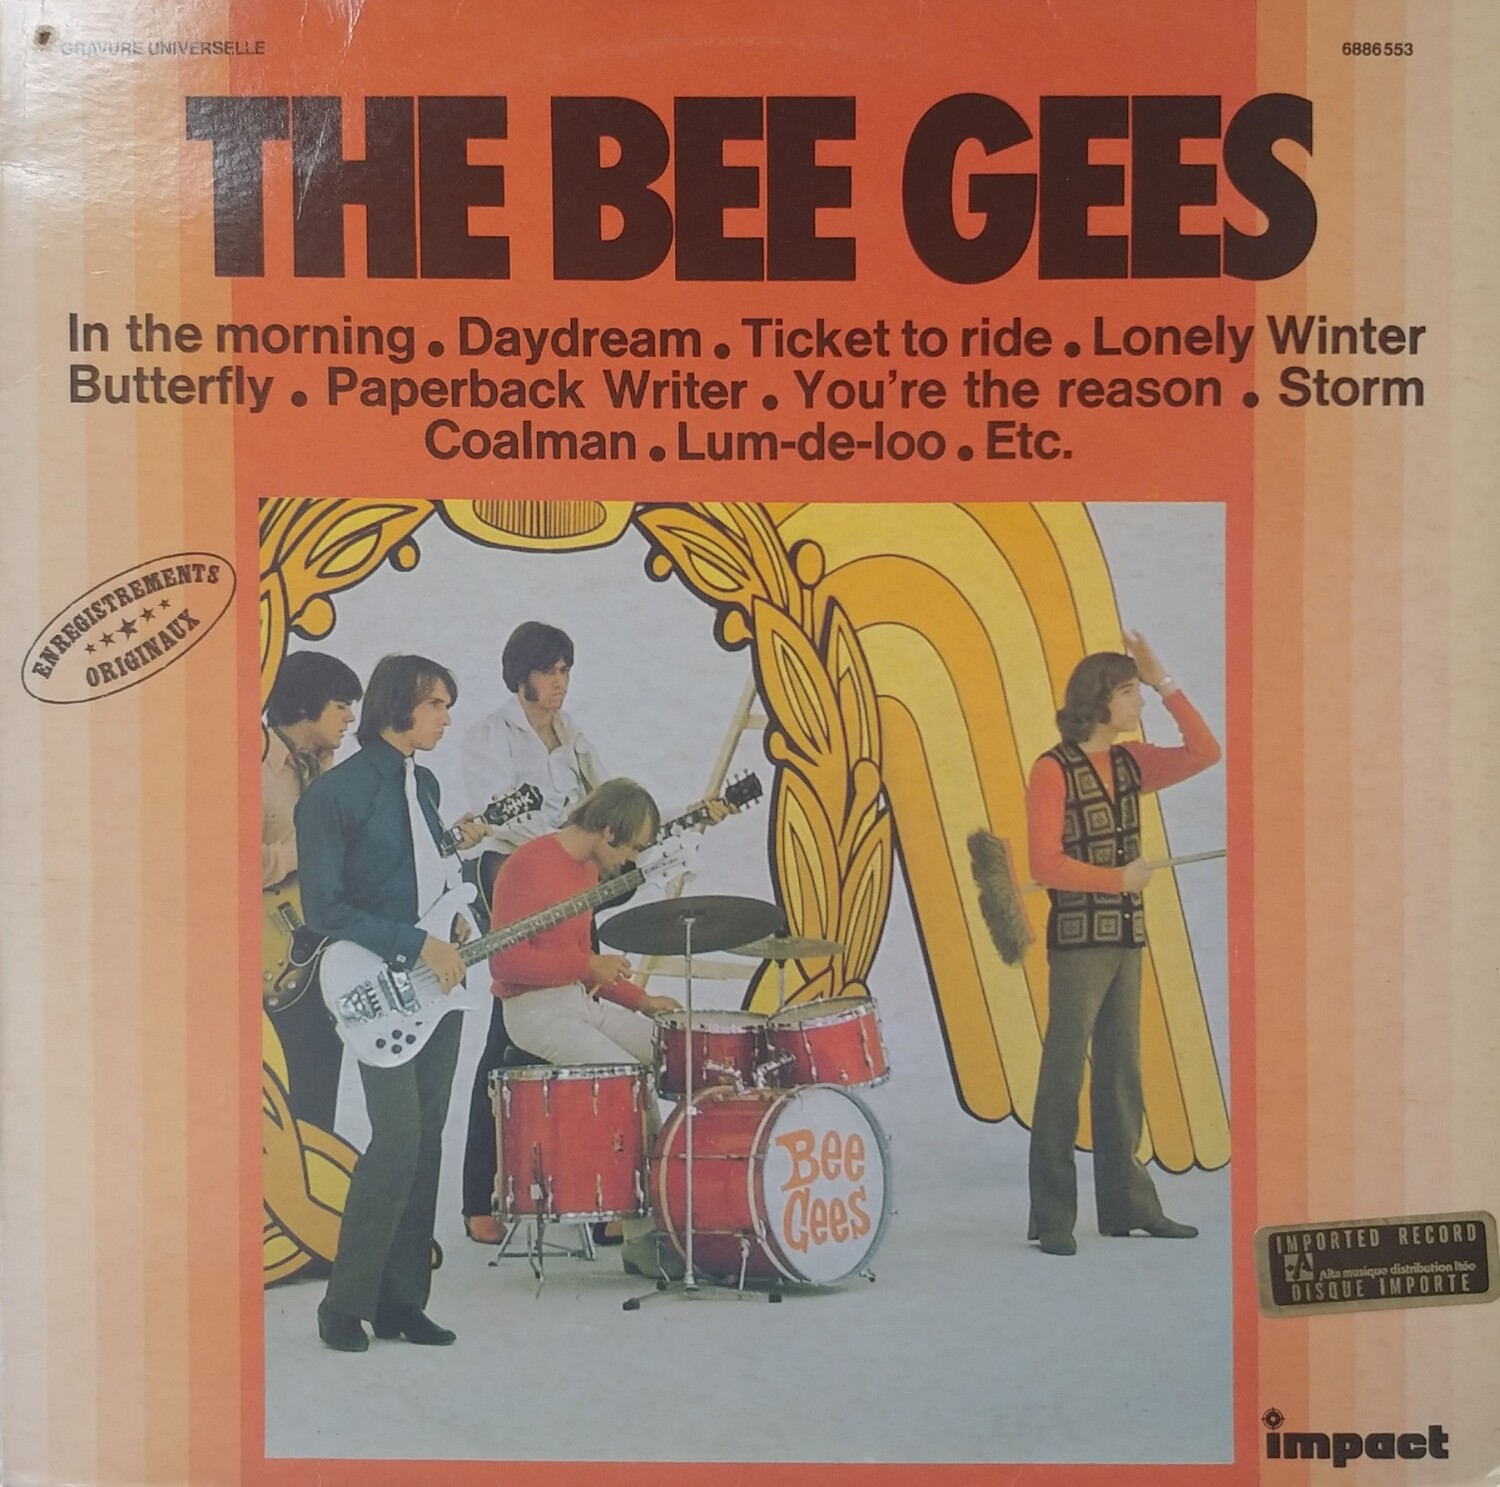 The Bee Gees - The Bee Gees